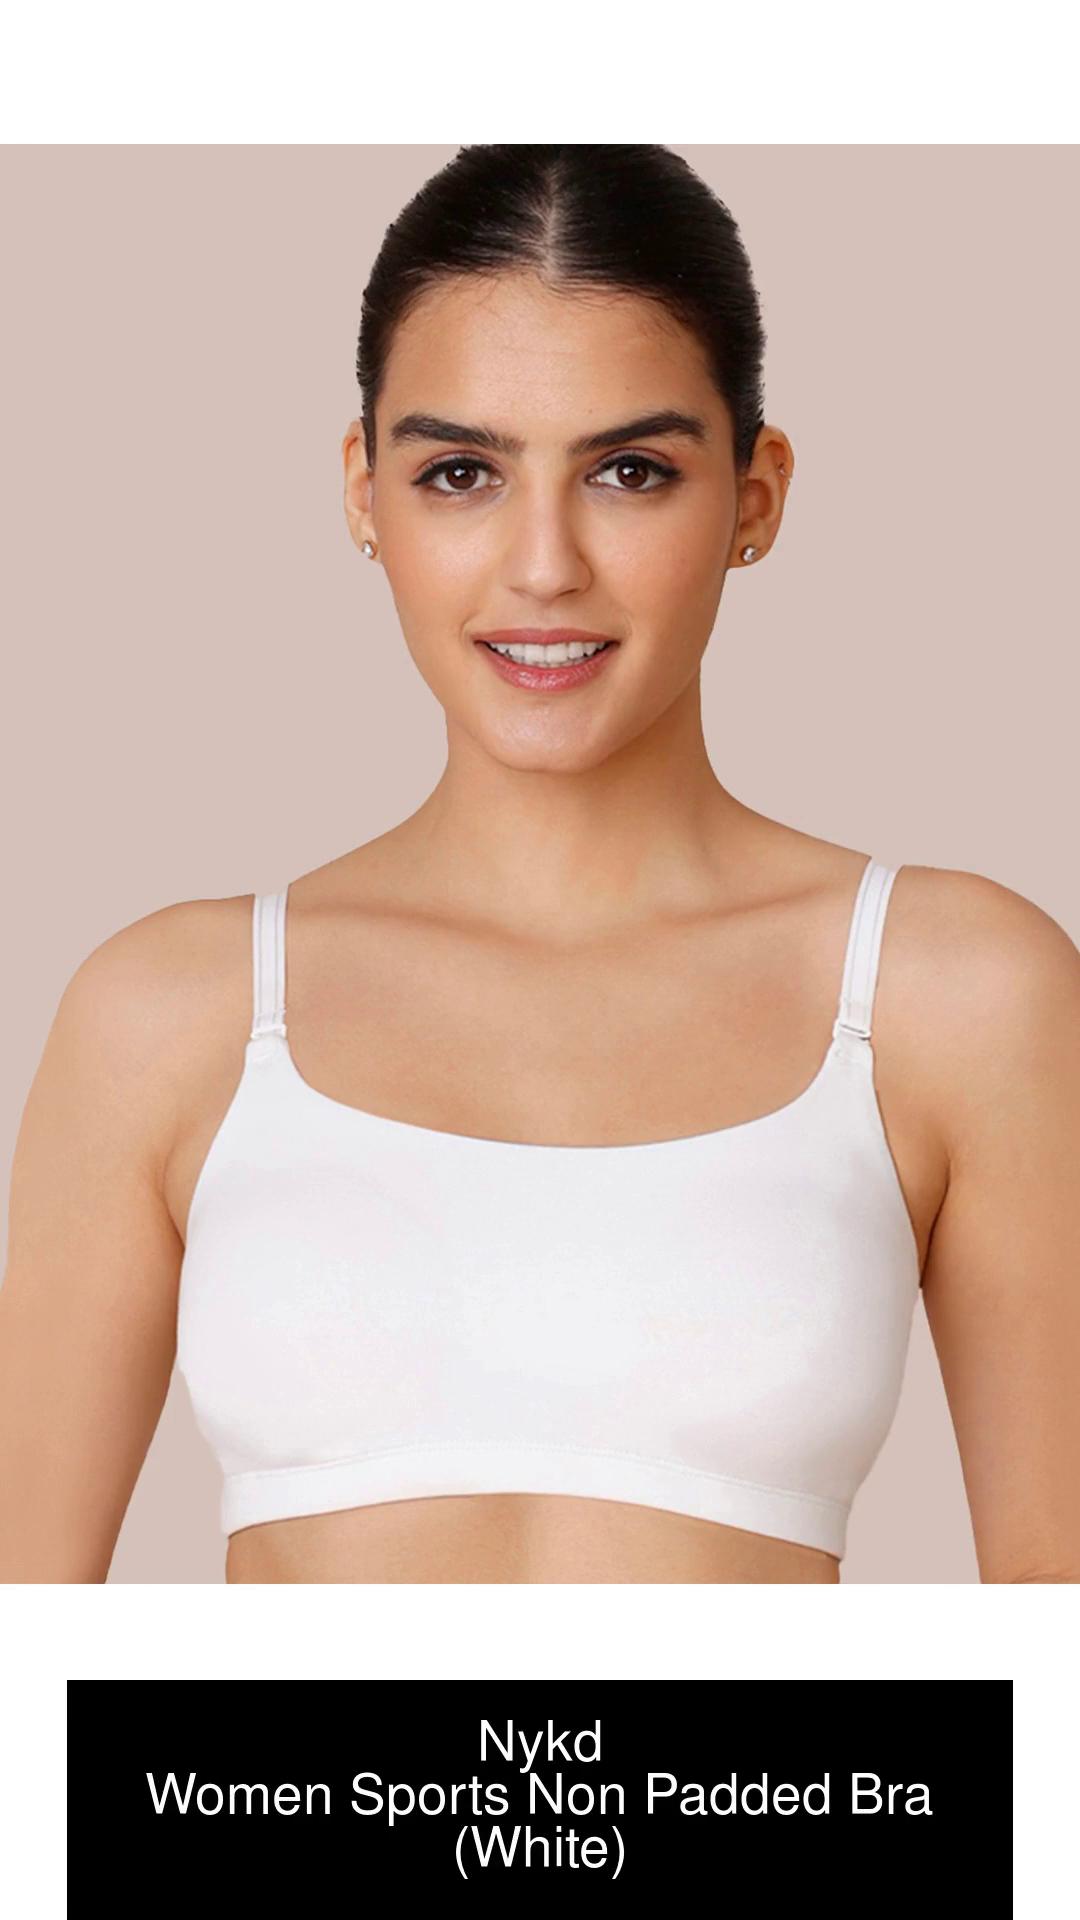 Nykd Everyday Slip-On T-Shirt Bra For Women Non Padded,Wire-Free